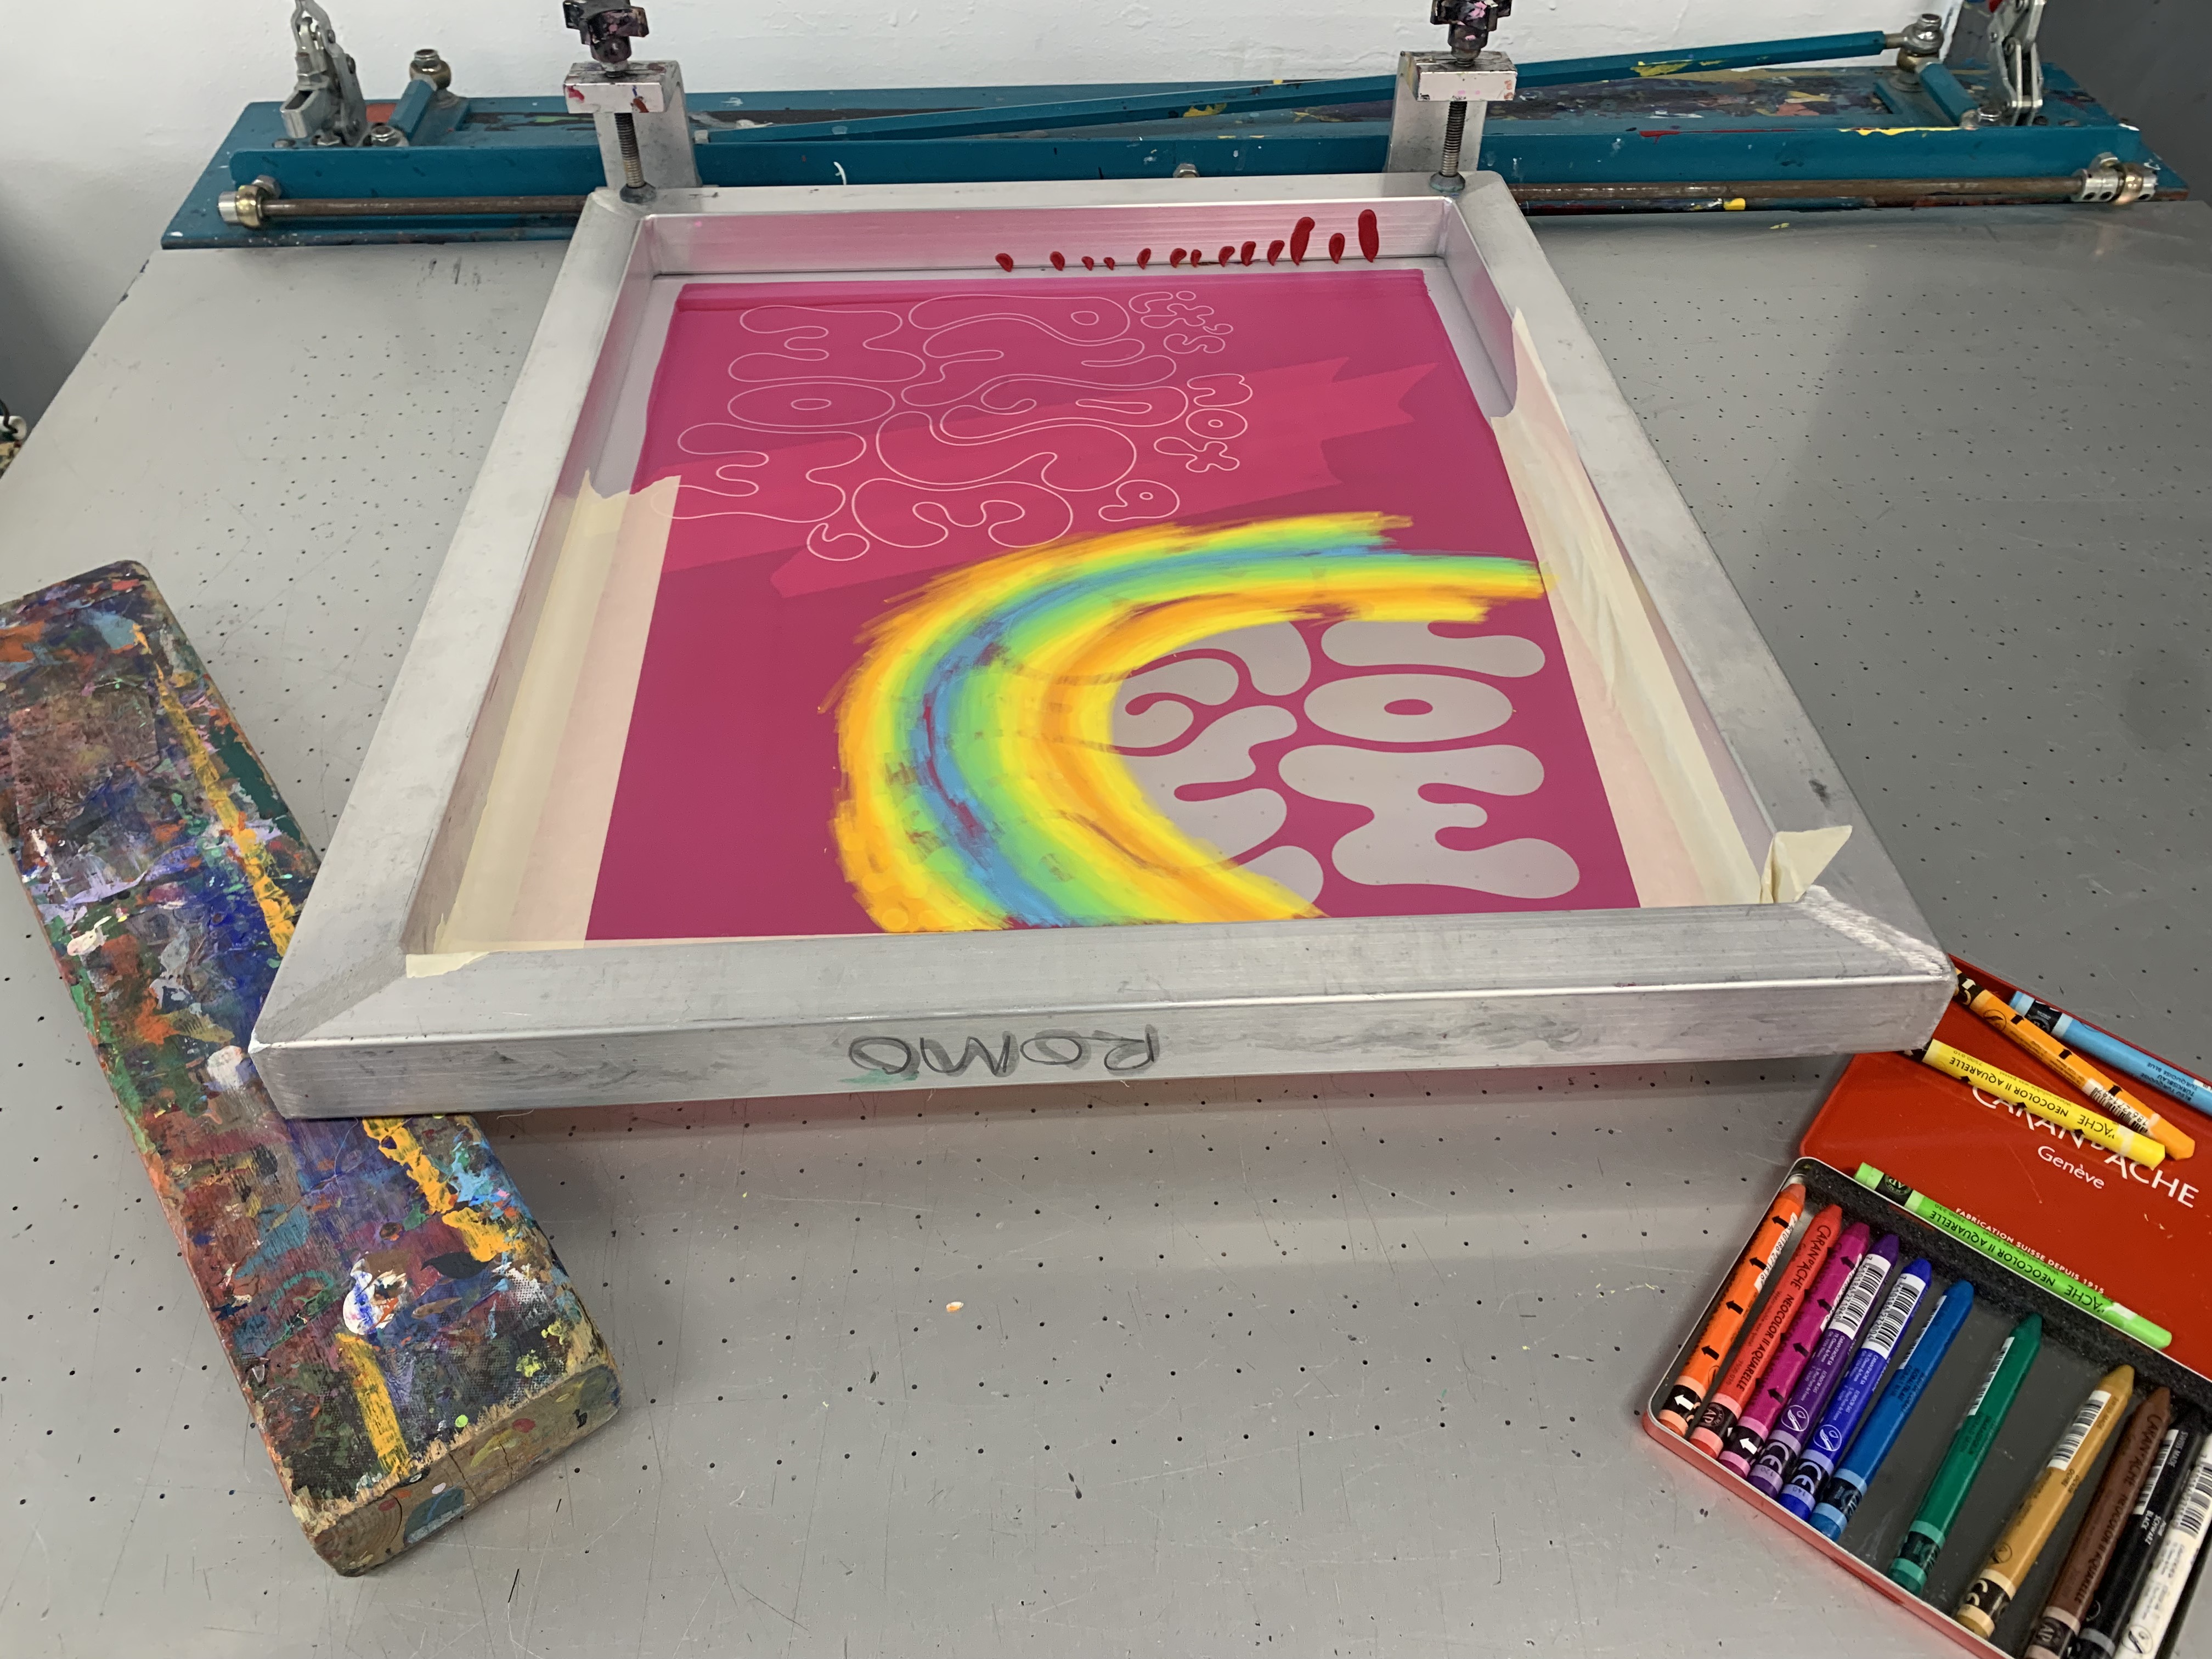 A print table set up for mono-screen printing, with a screen propped up on a colorful ink-covered wooden block. On the screen, there is pink emulsion with a stencil that has been exposed to read 'it's not a phase, mom' in bubbly letters. In this image, the type isn't readable because it is colored over partly with a gradient of orange, yellow, green, and blue pastel. To the right of the screen, there is an open red case of water-soluble pastels in all colors.